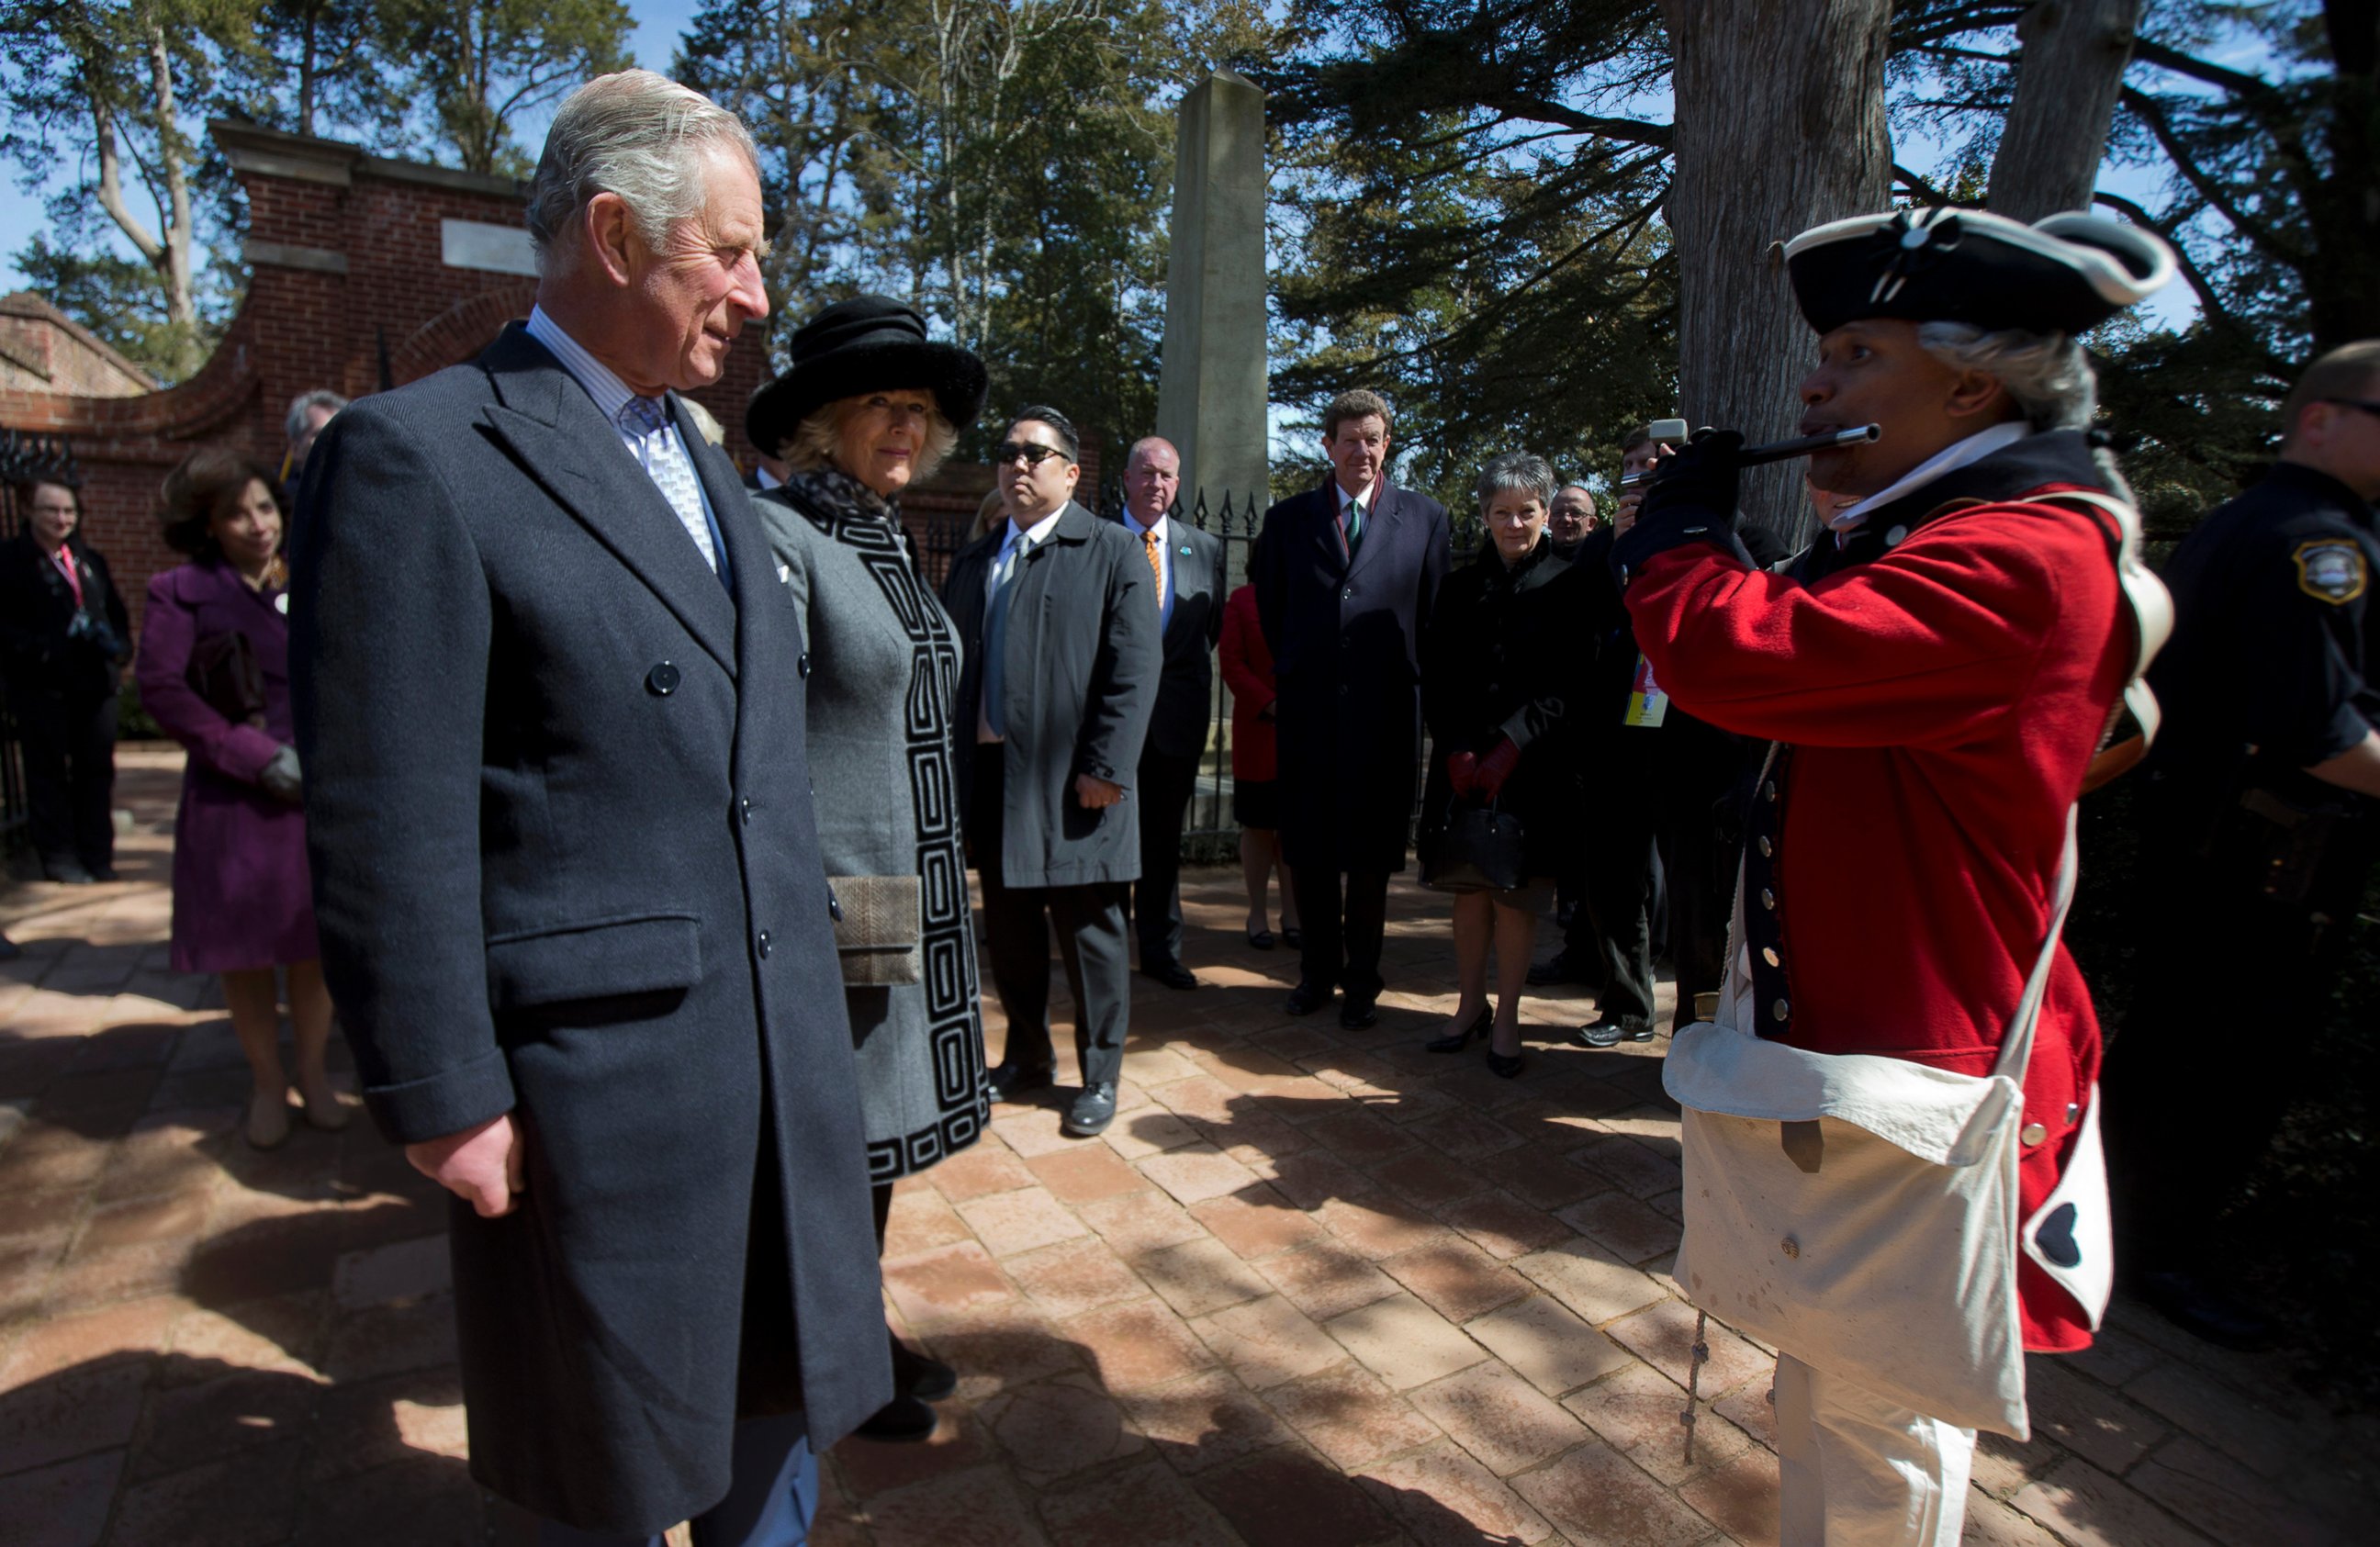 PHOTO: Prince Charles and his wife Camilla, the Duchess of Cornwall, listen to Dan Francisco play "God Save the Queen" during a visit to Mount Vernon, the plantation home of George Washington, March 18, 2015, in Mount Vernon, Va.